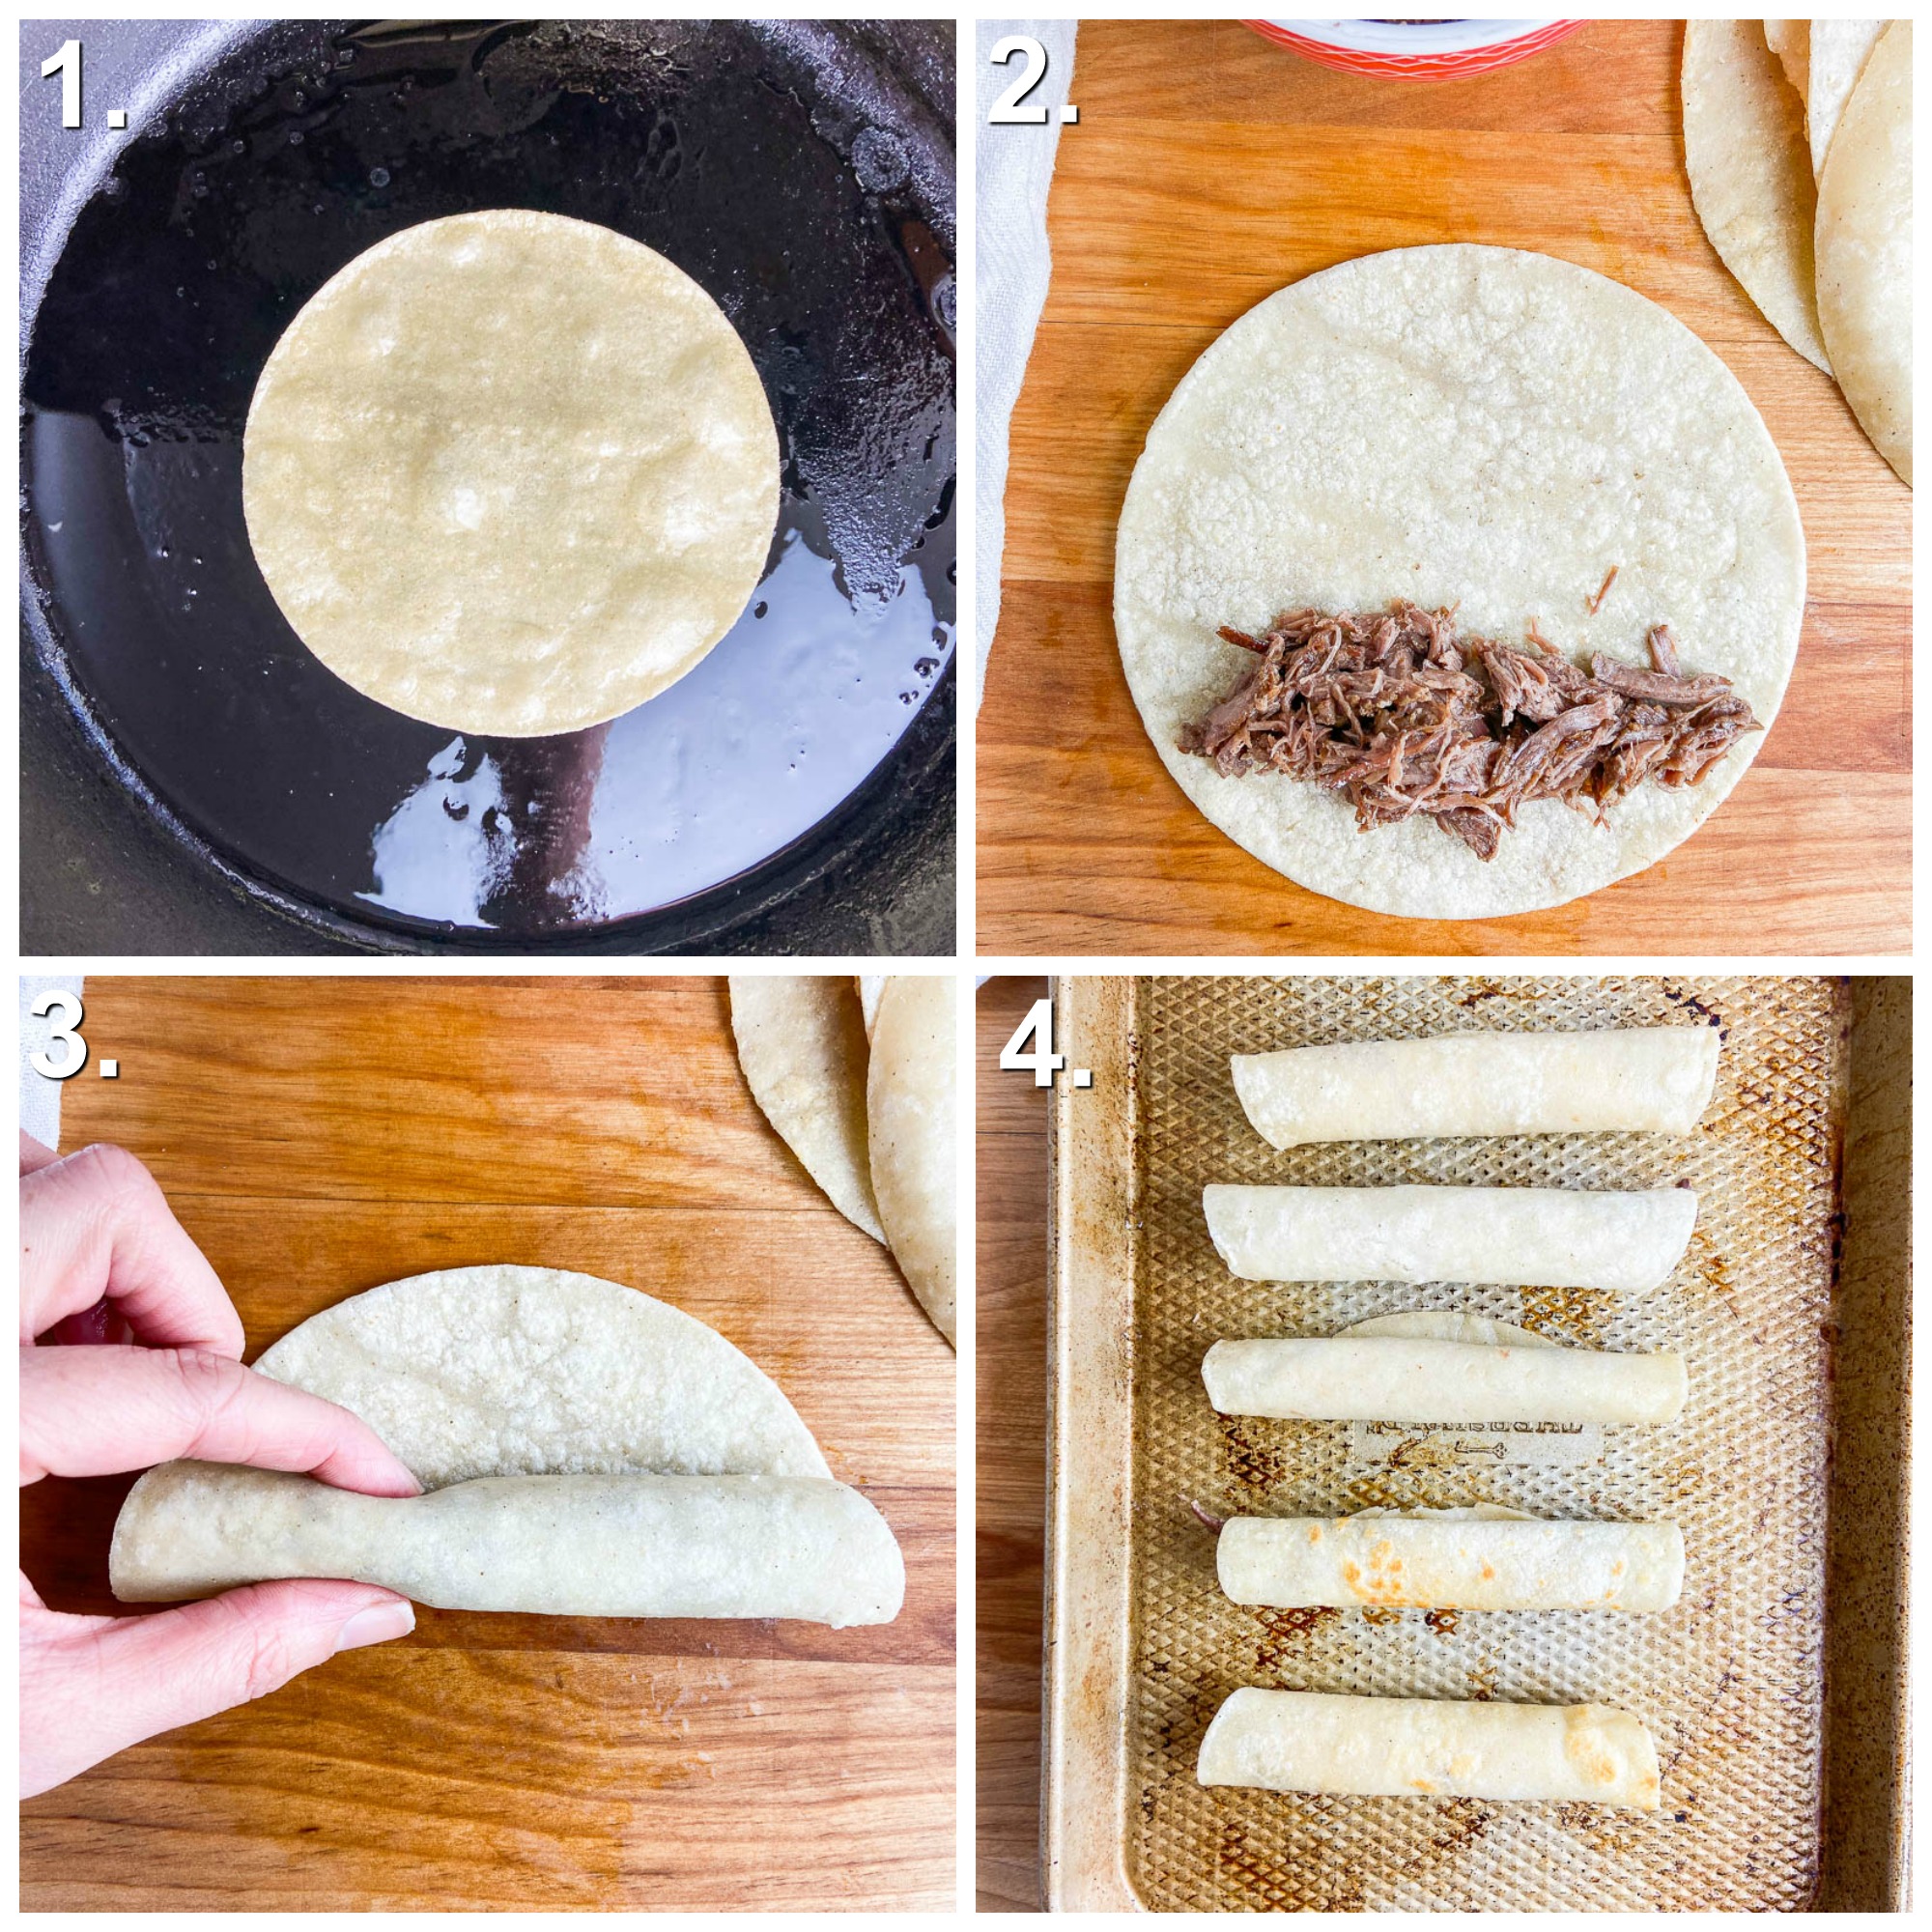 Step by Step photos showing how to make shredded beef taquitos